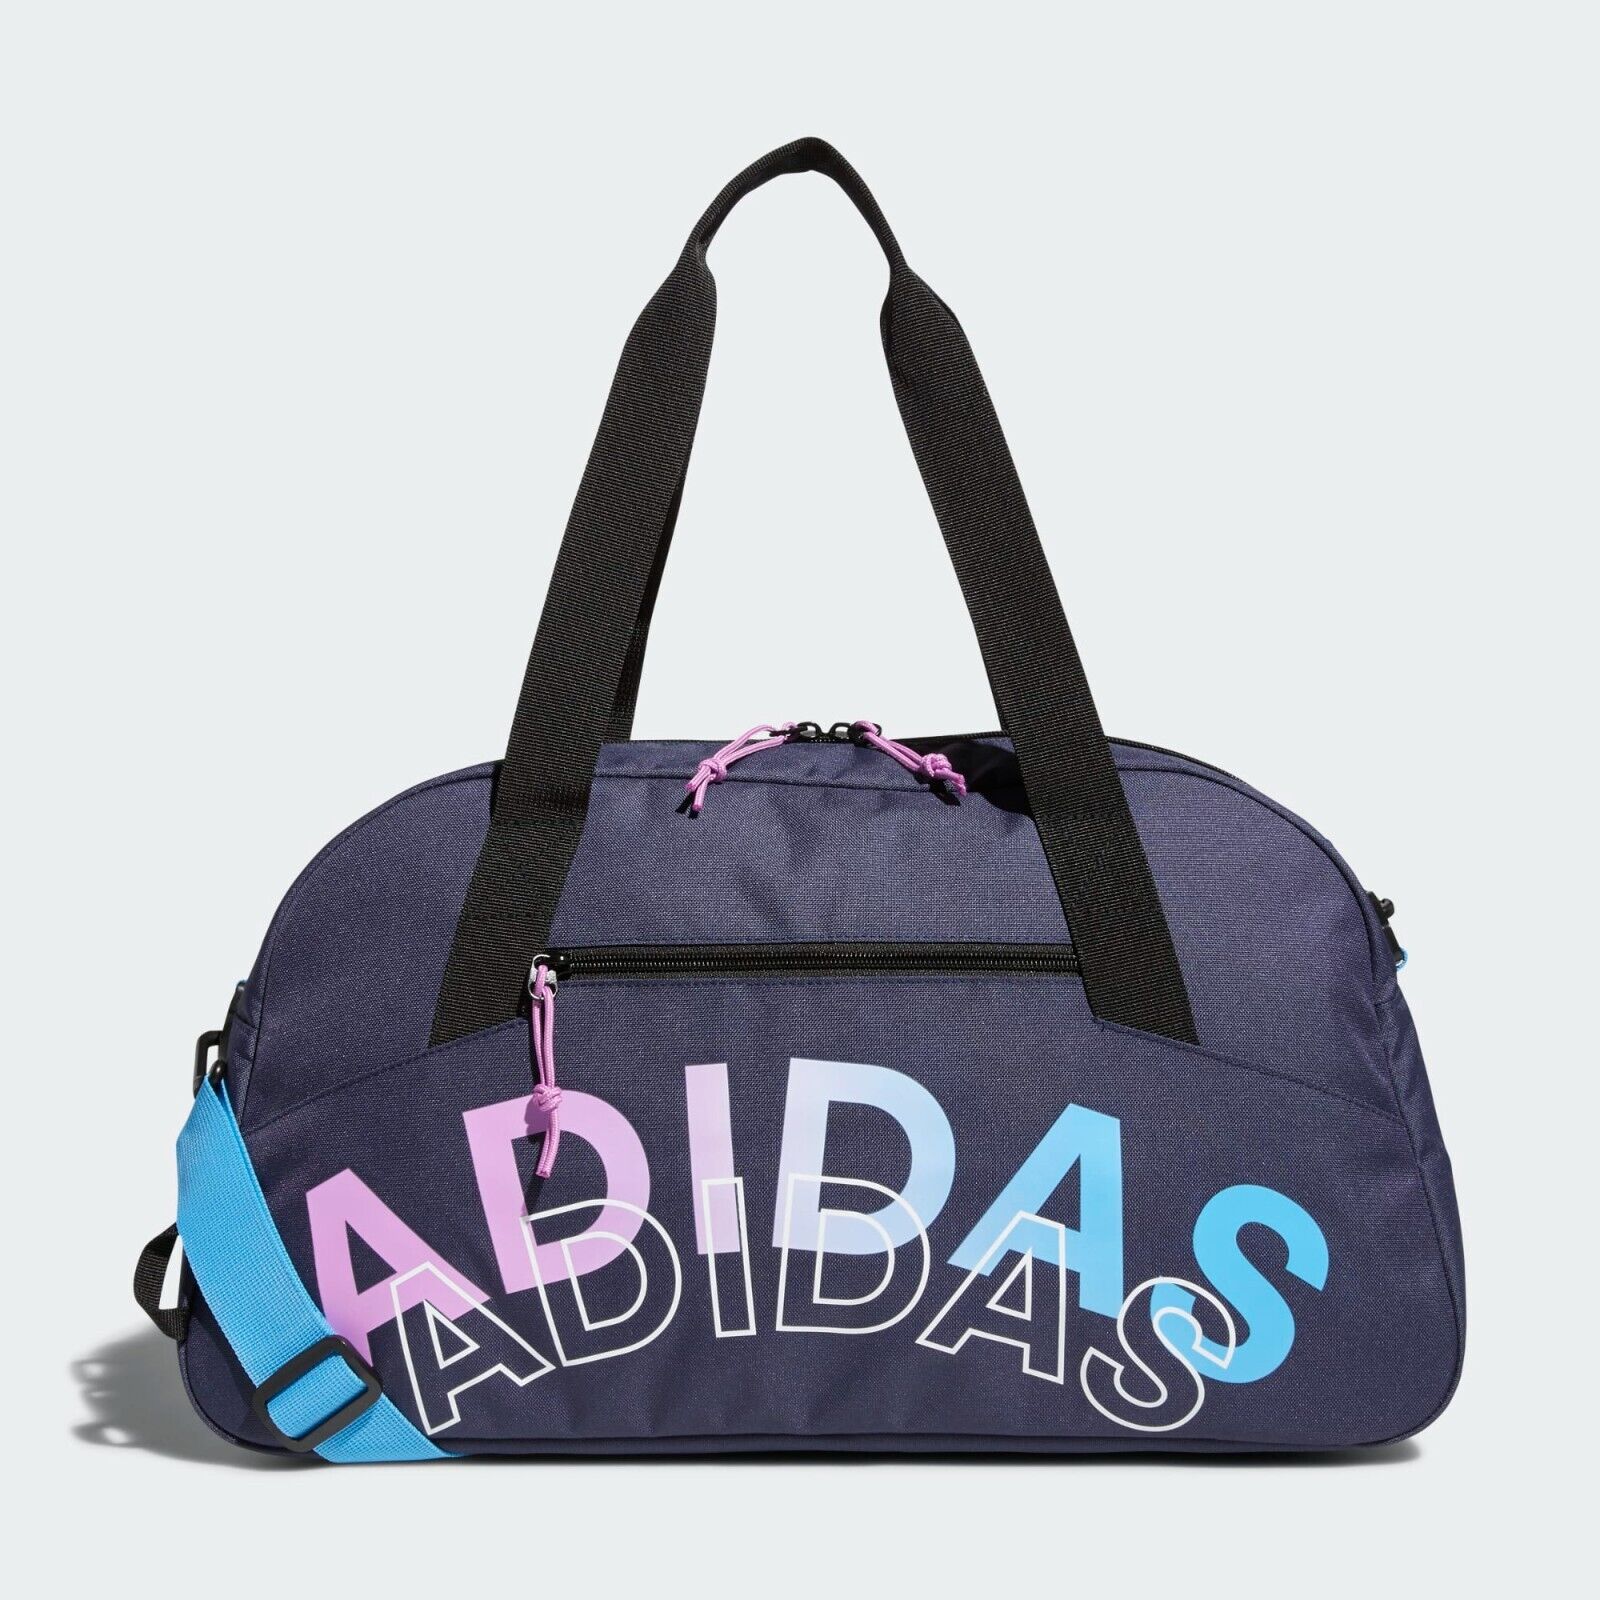 Adidas GRAPHIC UNISEX Duffel Black BLUE TOP FRONT ZIP GYM DUAL CARRY BAG  NEW NWT